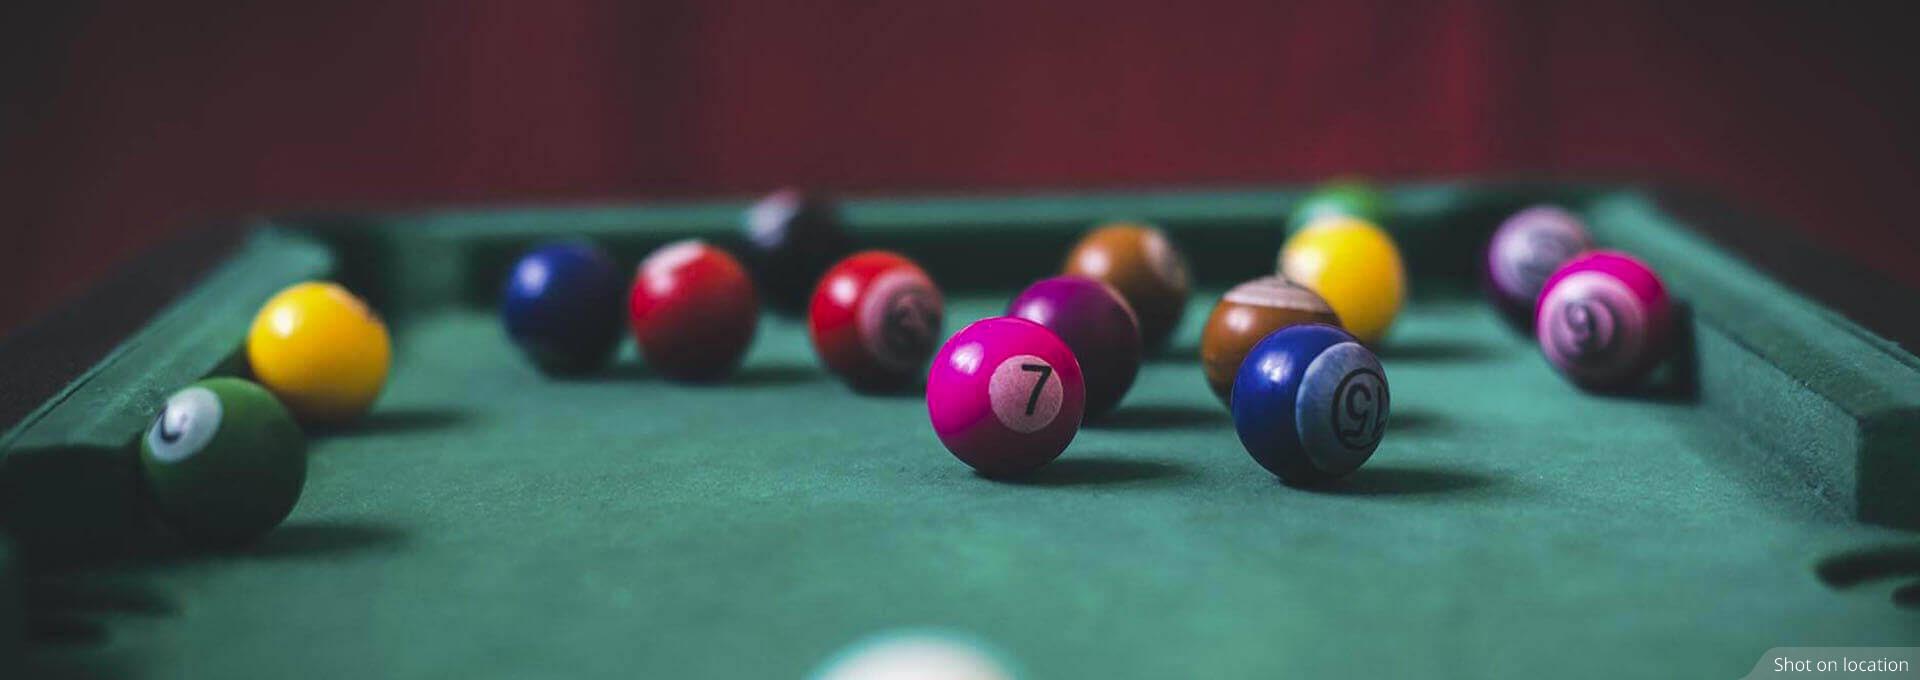 Pool Billiards near Cottages by House of Hiranandani in Devanahalli, Bengaluru